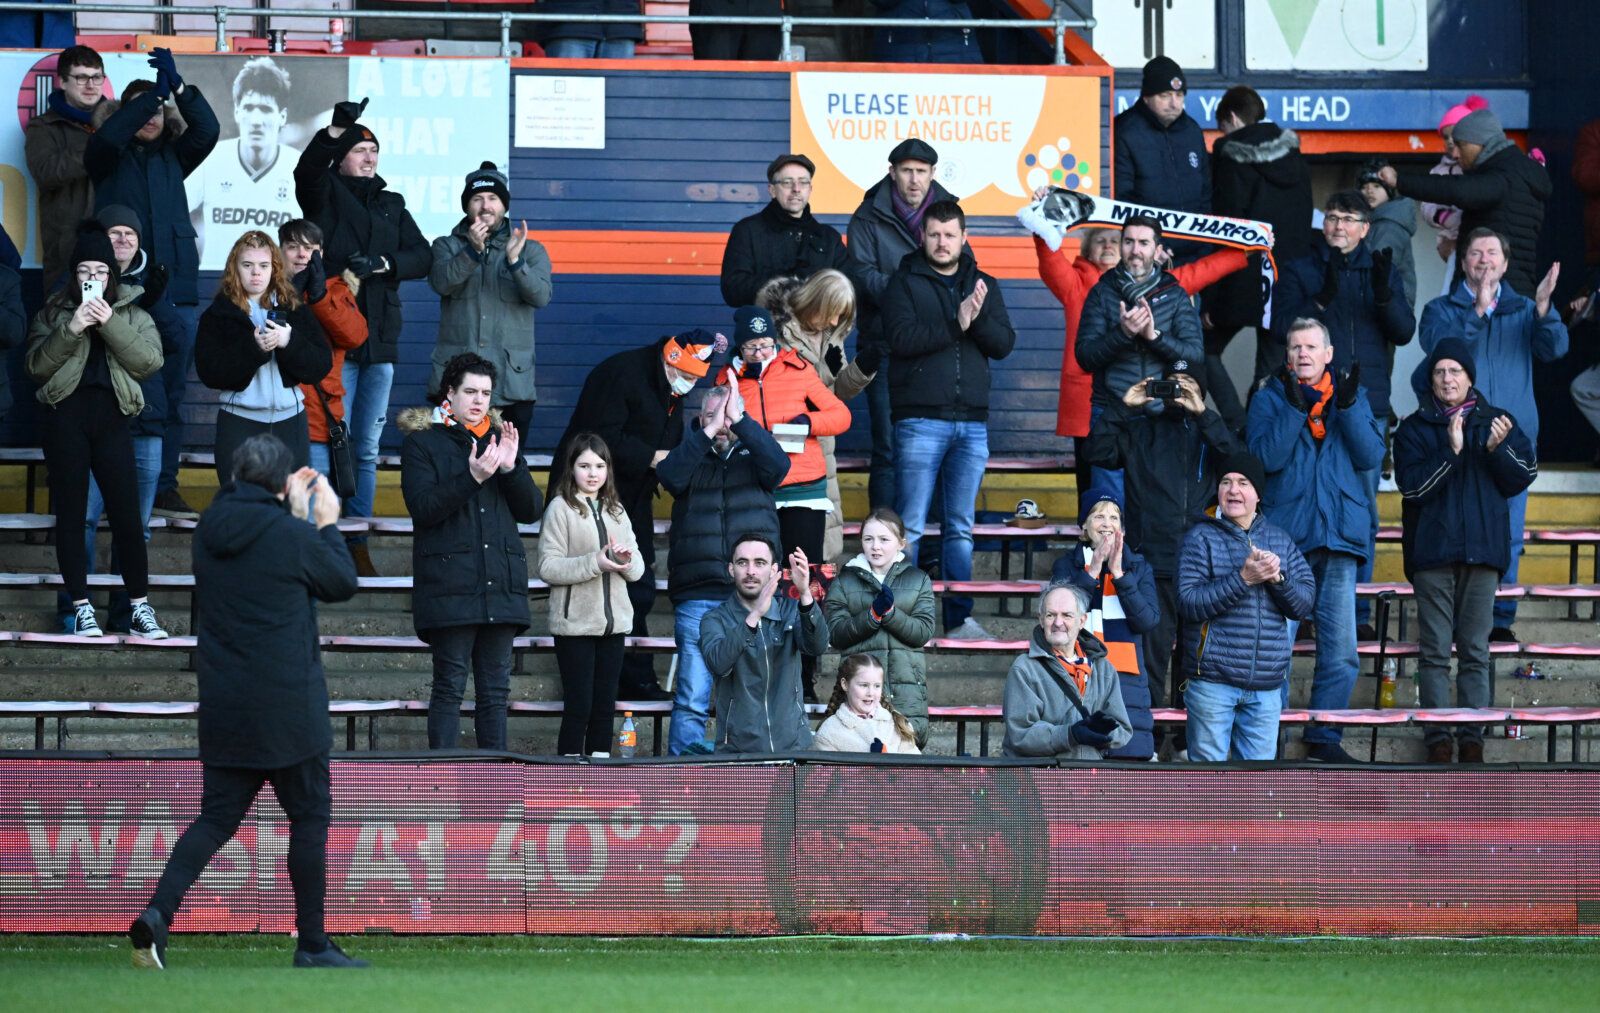 Soccer Football - FA Cup Third Round - Luton Town v Harrogate Town - Kenilworth Road, Luton, Britain - January 9, 2022 Luton Town manager Nathan Jones applauds fans after the match REUTERS/Dylan Martinez